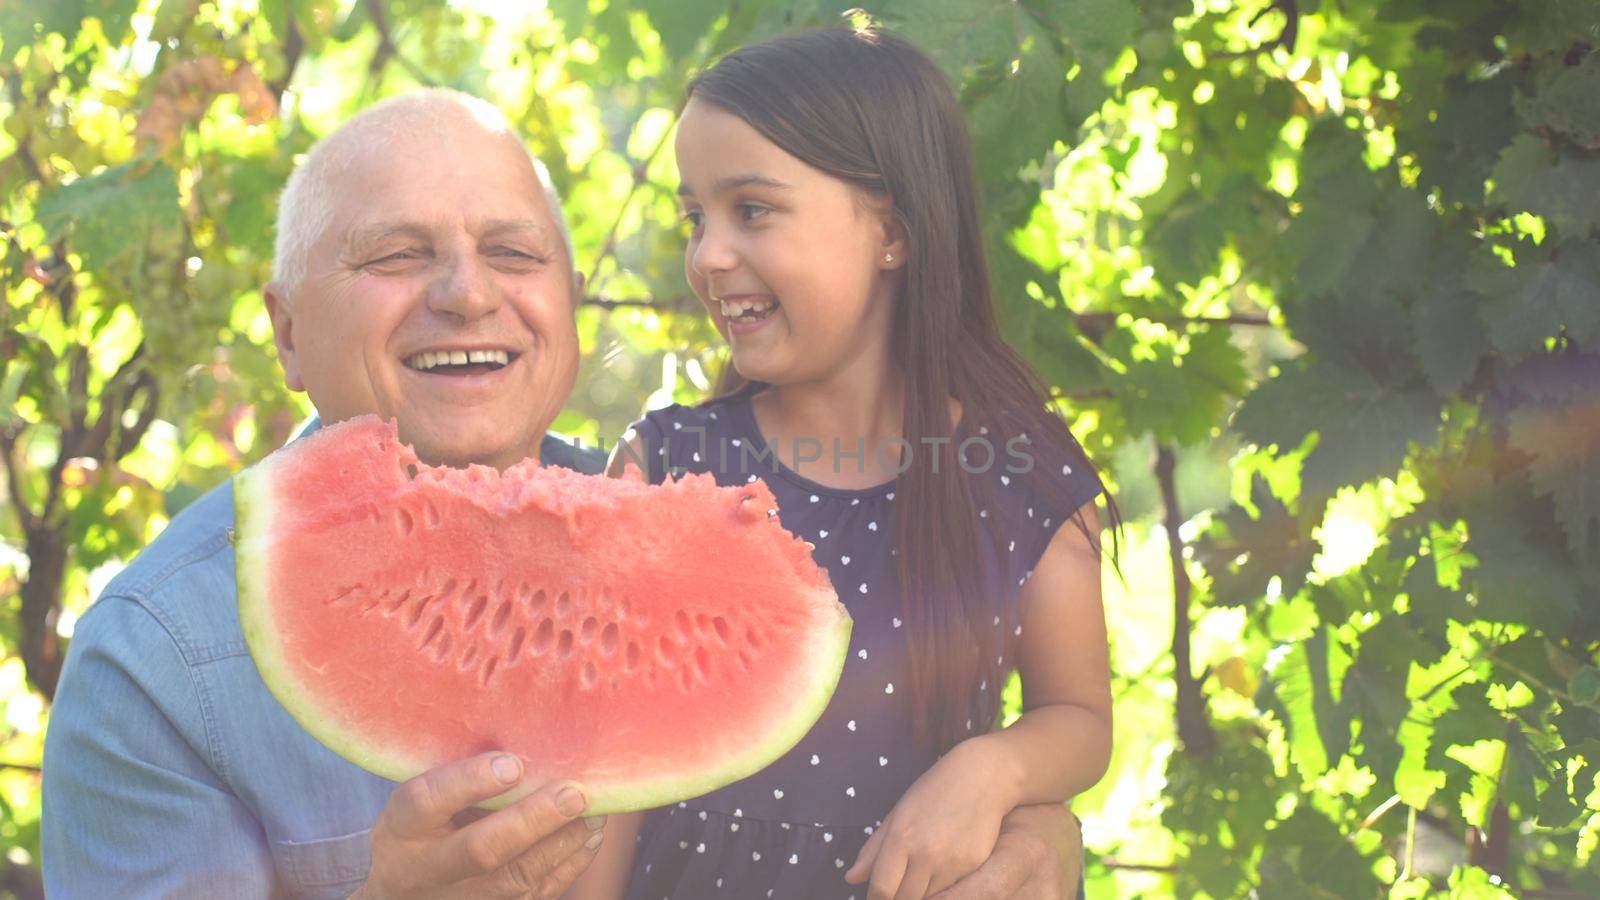 little girl and grandfather with watermelon smile and eat by Andelov13